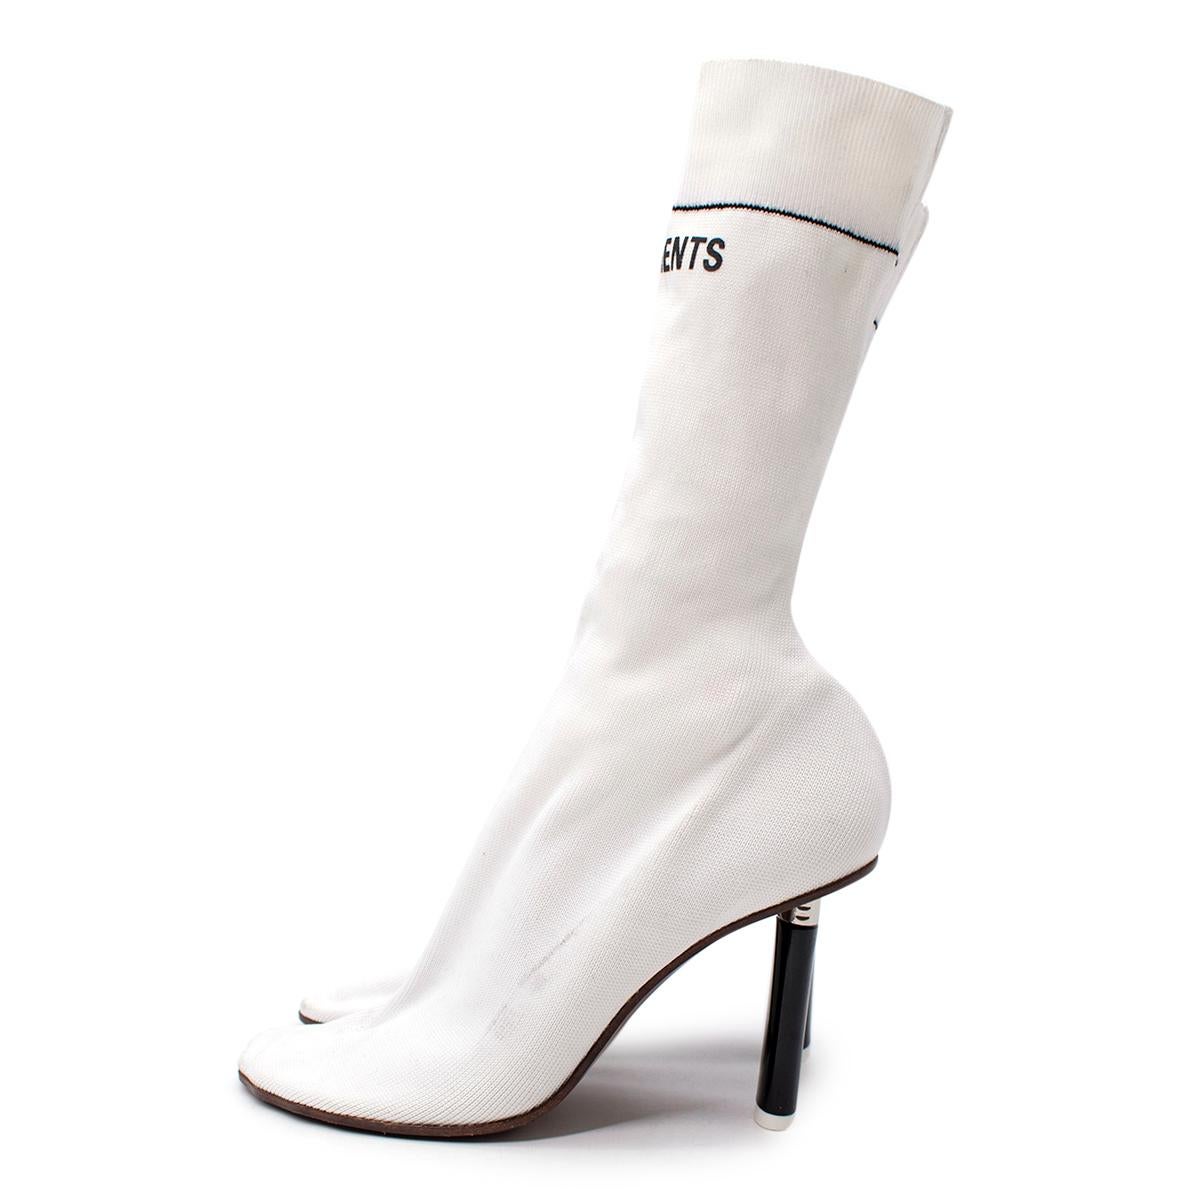 Vetements White Lighter Heel Stretch Sock Boots

- Iconic Vetements sock boot, with faux lighter heel
- White ribbed pull on design reminscent of a sports sock, with Vetements logo branding at the ankle
- Toe shaped to the natutral curve of the